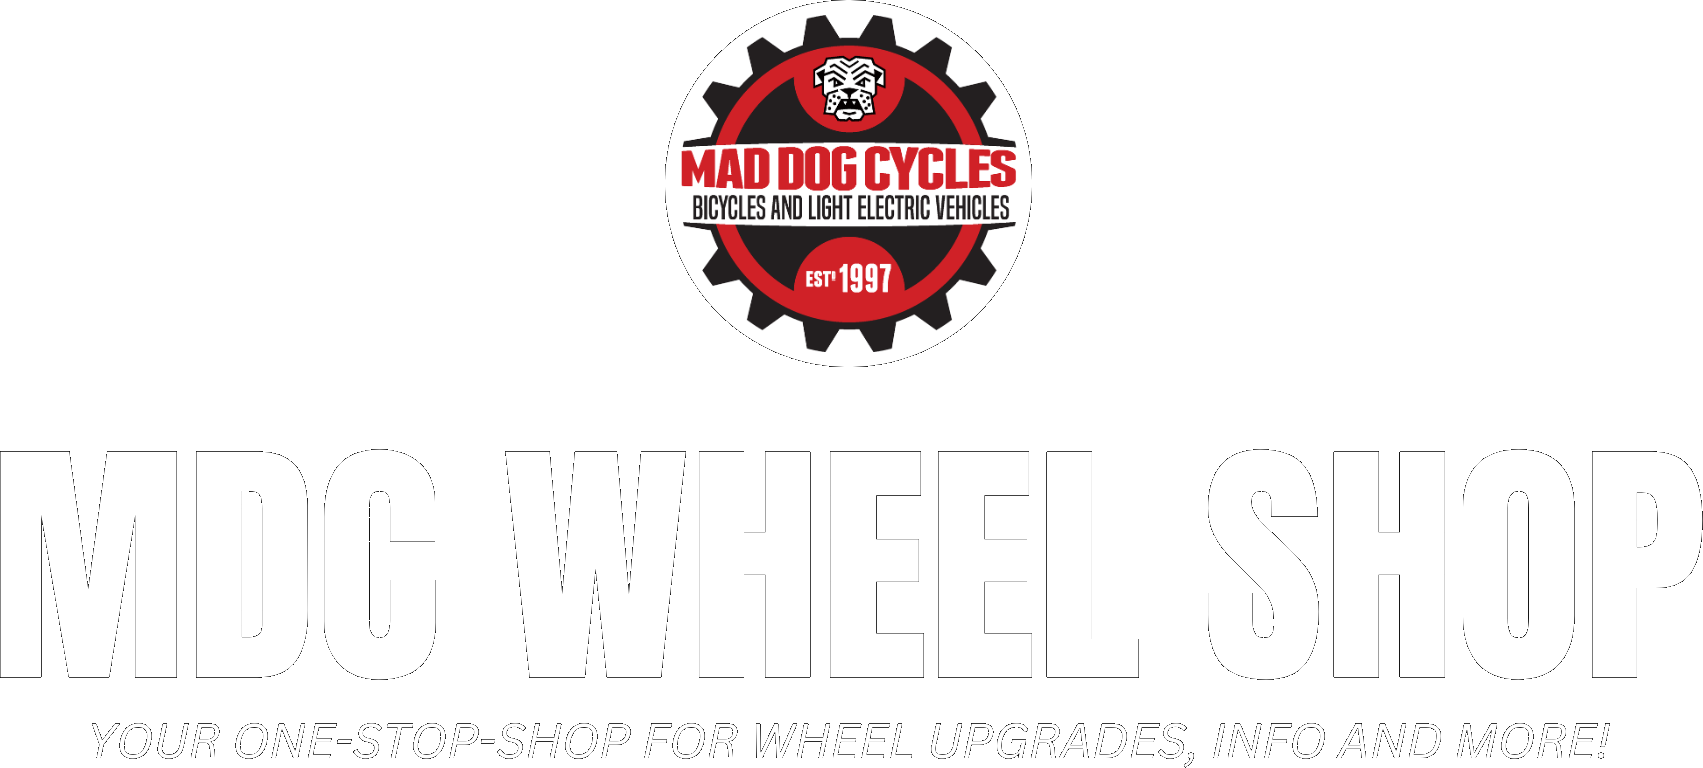 MDC Wheel Shop Your One-Stop-Shop for wheel upgrades, INFO and More